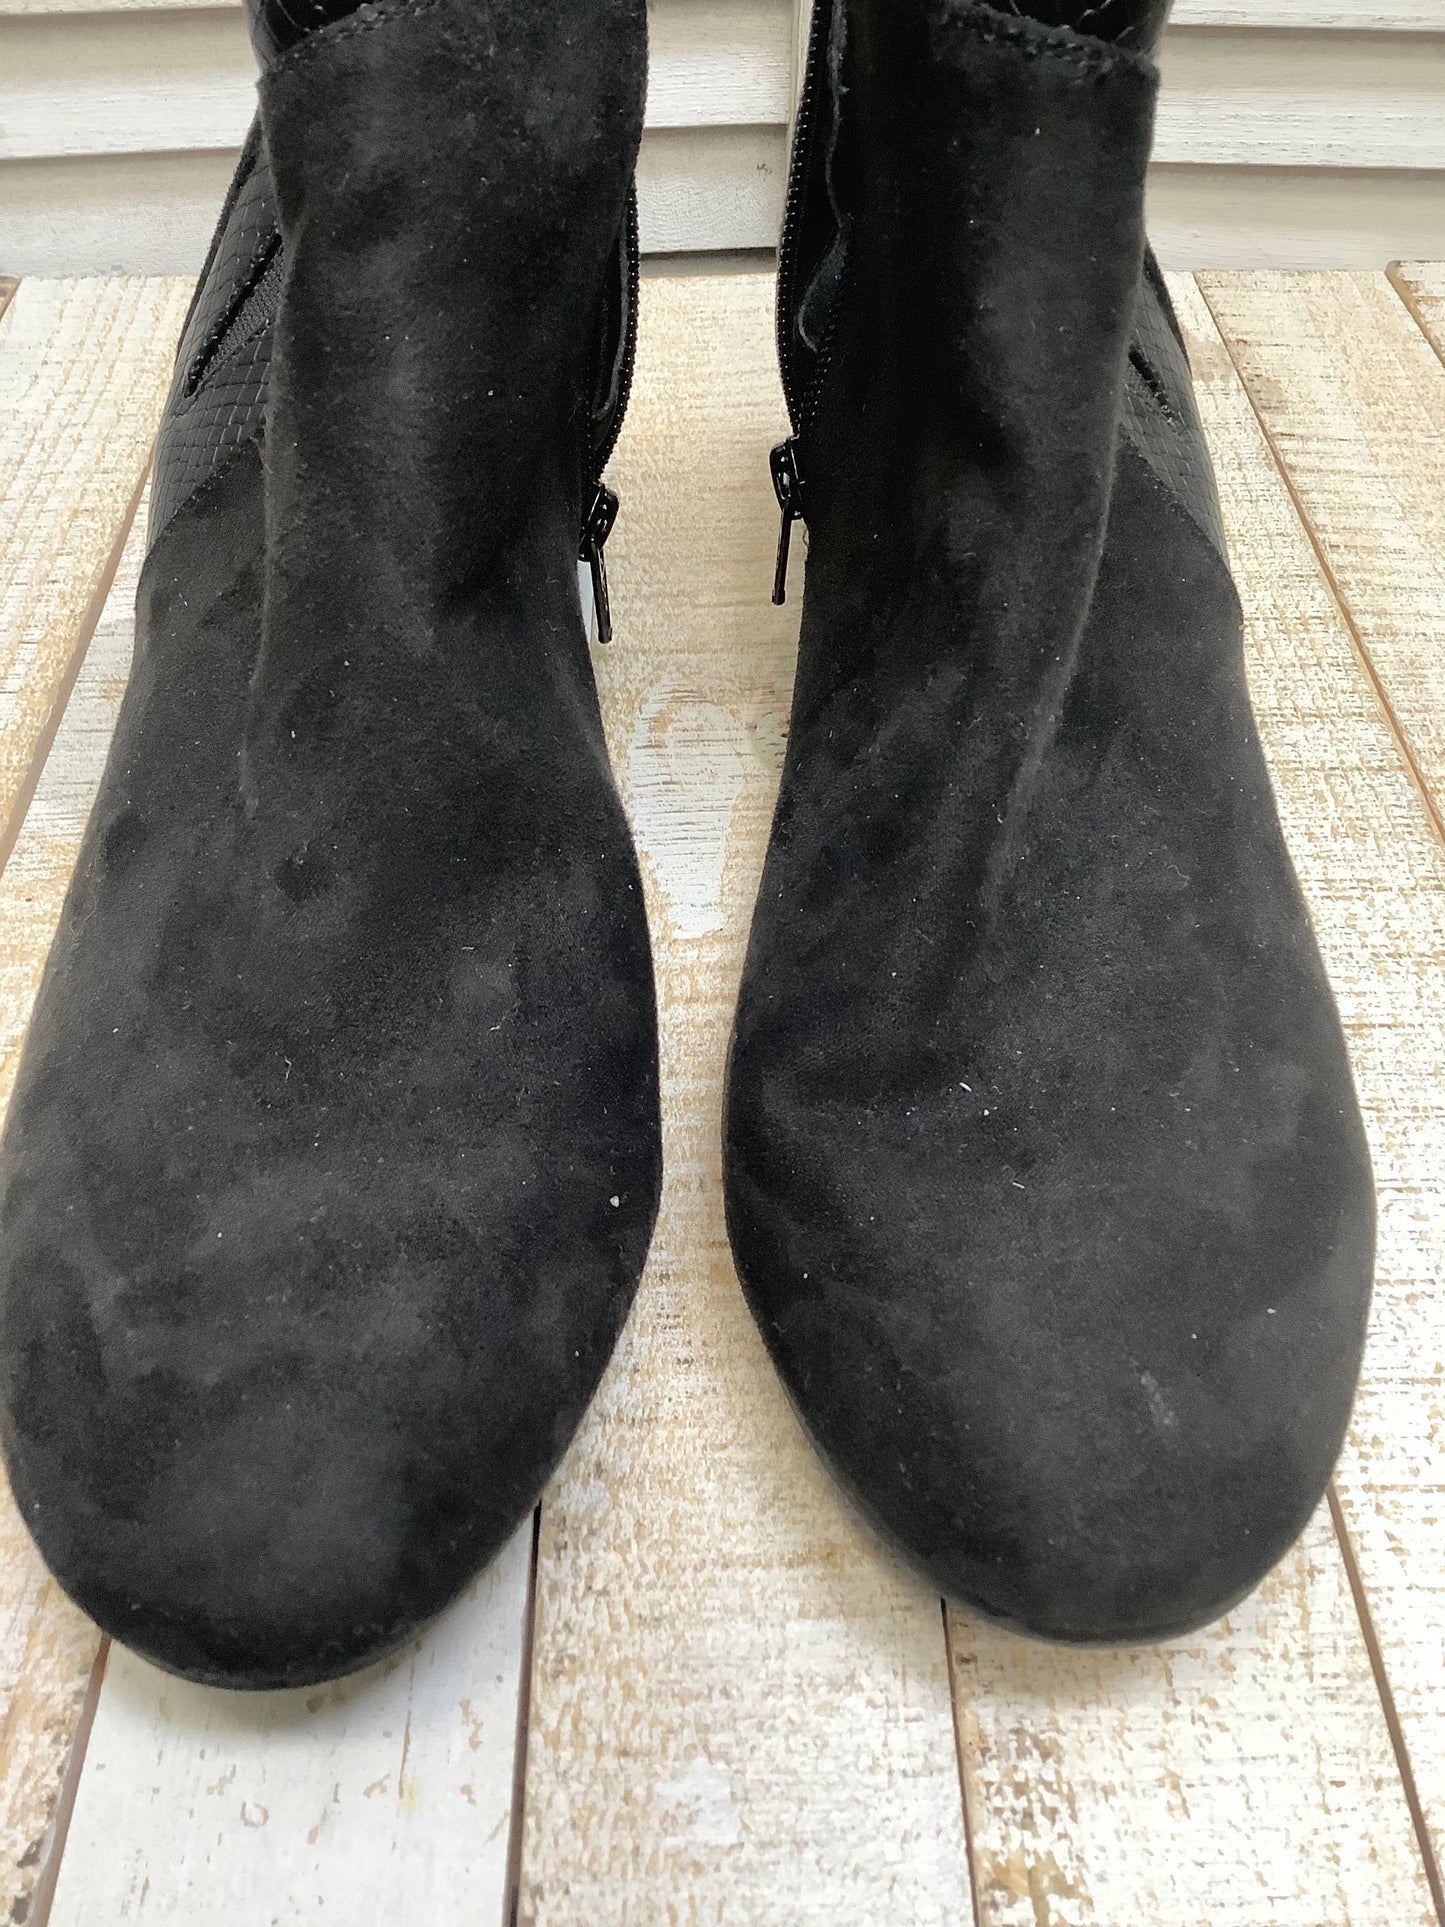 Black Boots Ankle Heels Croft And Barrow, Size 7